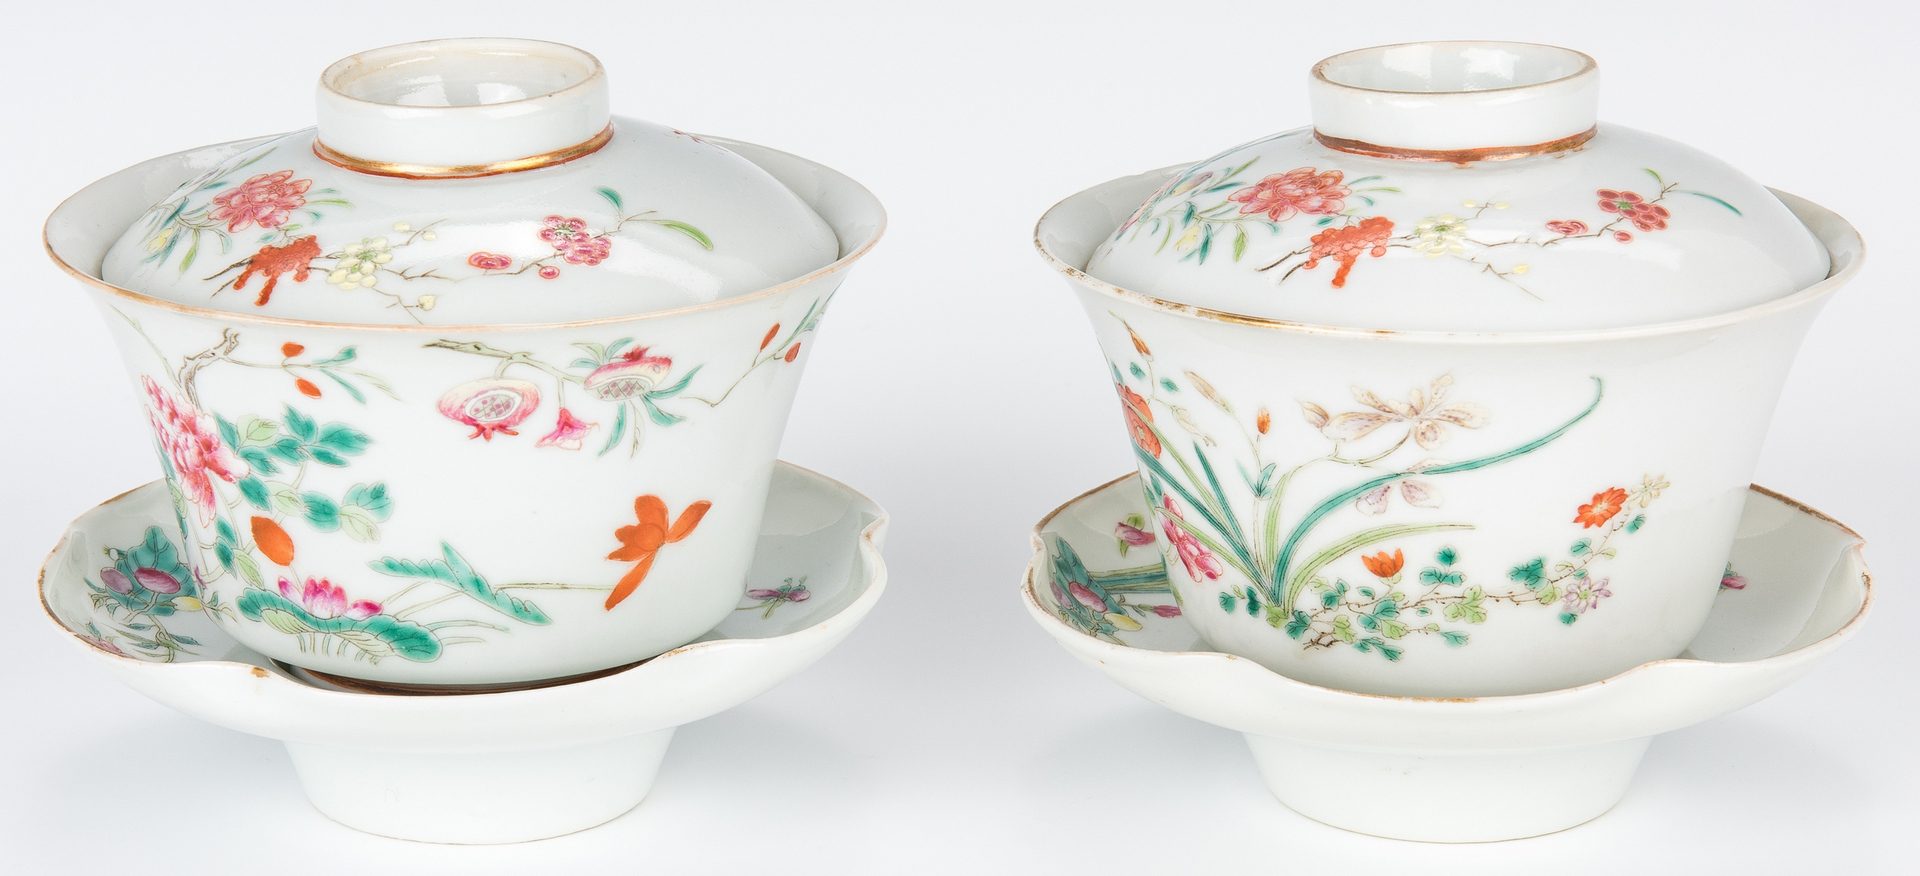 Lot 18: 4 Chinese Famille Rose Porcelain Tea Cups w/ Covers